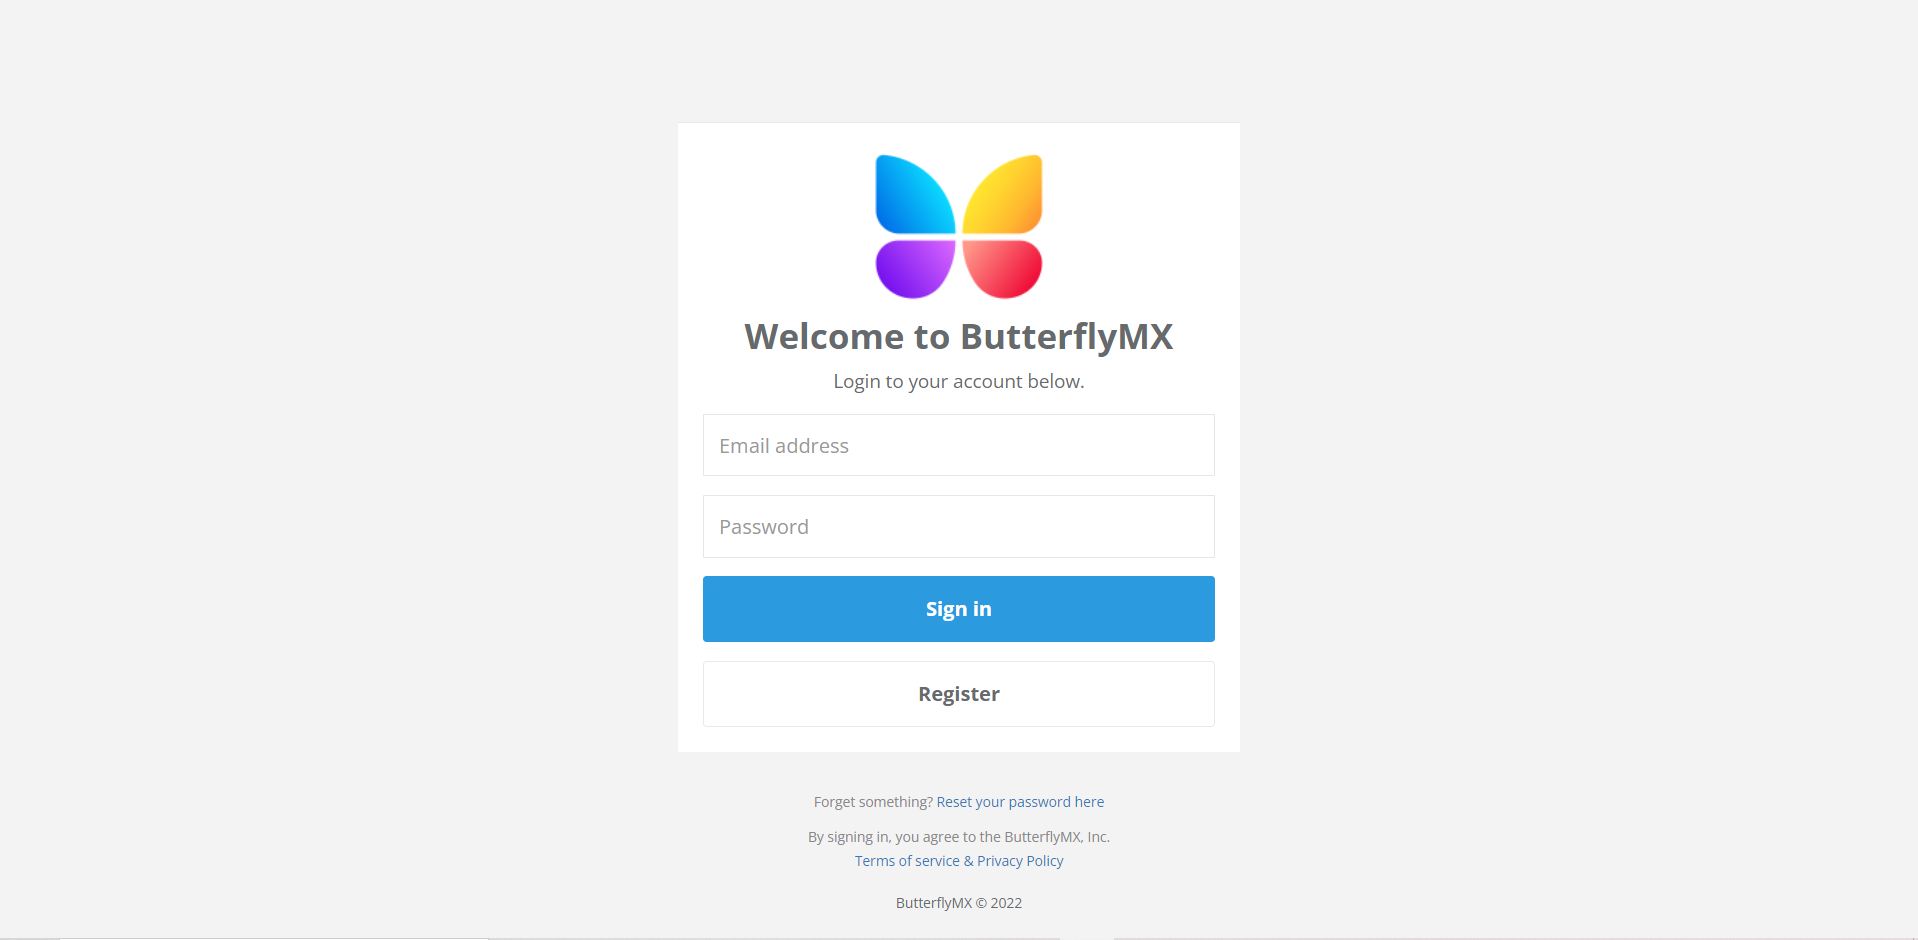 Log into the ButterflyMX OS